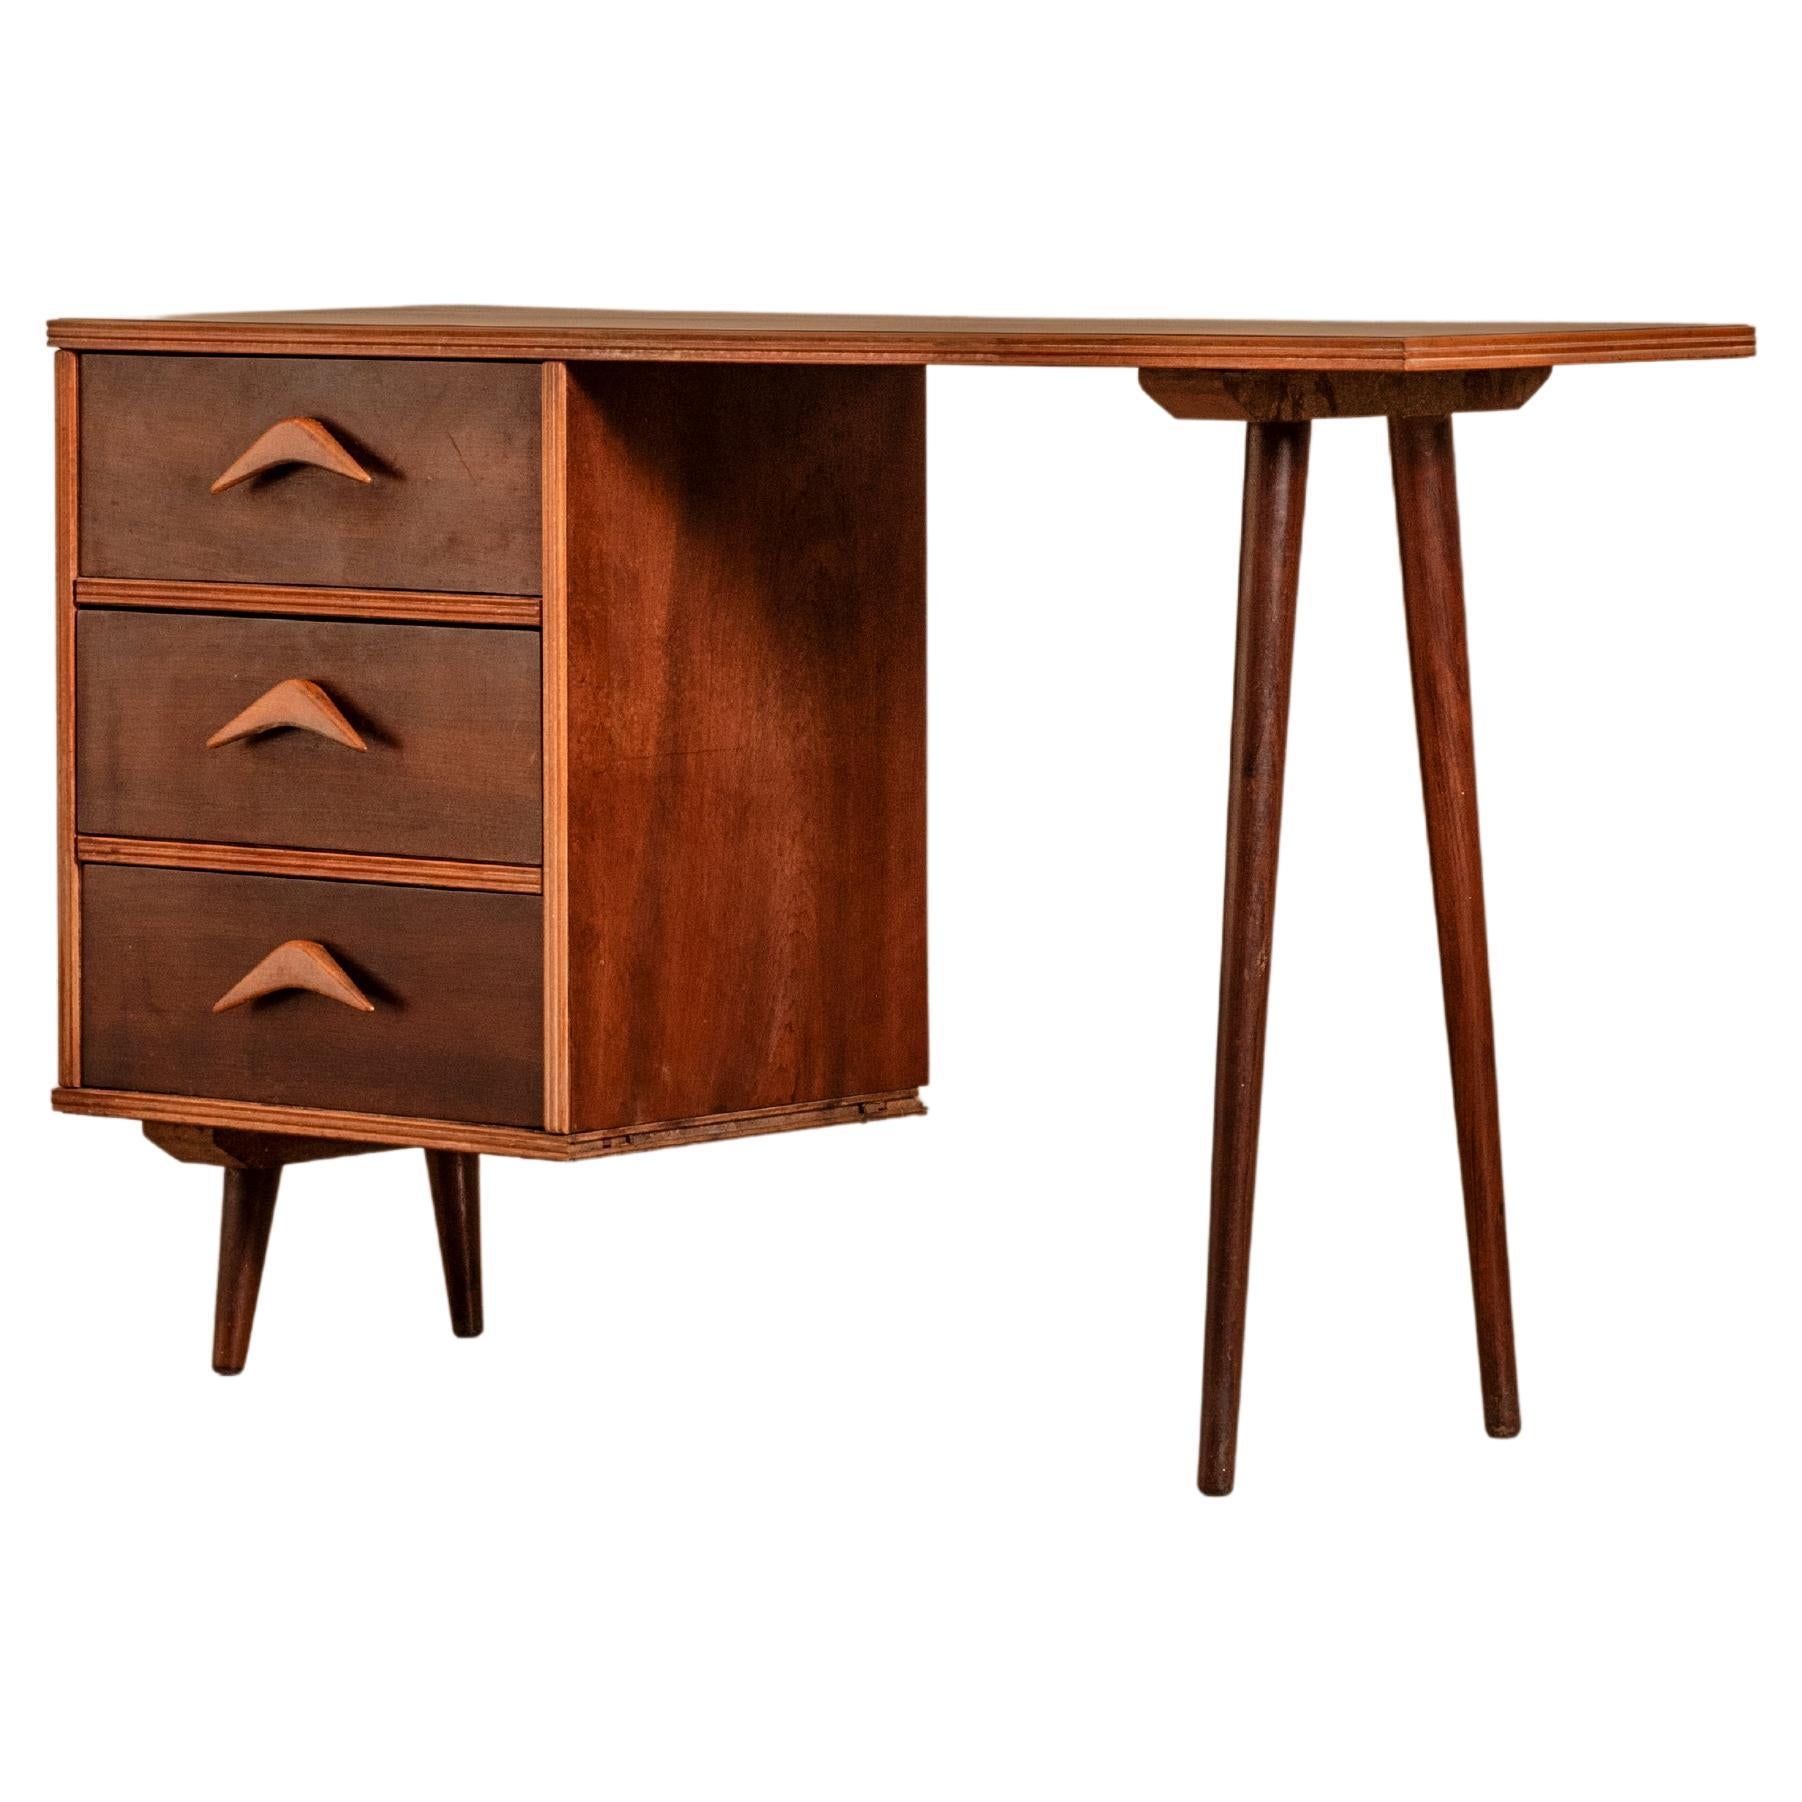 50's Dressing table with drawers, Móveis Cimo, Brazilian Mid-Century Design For Sale